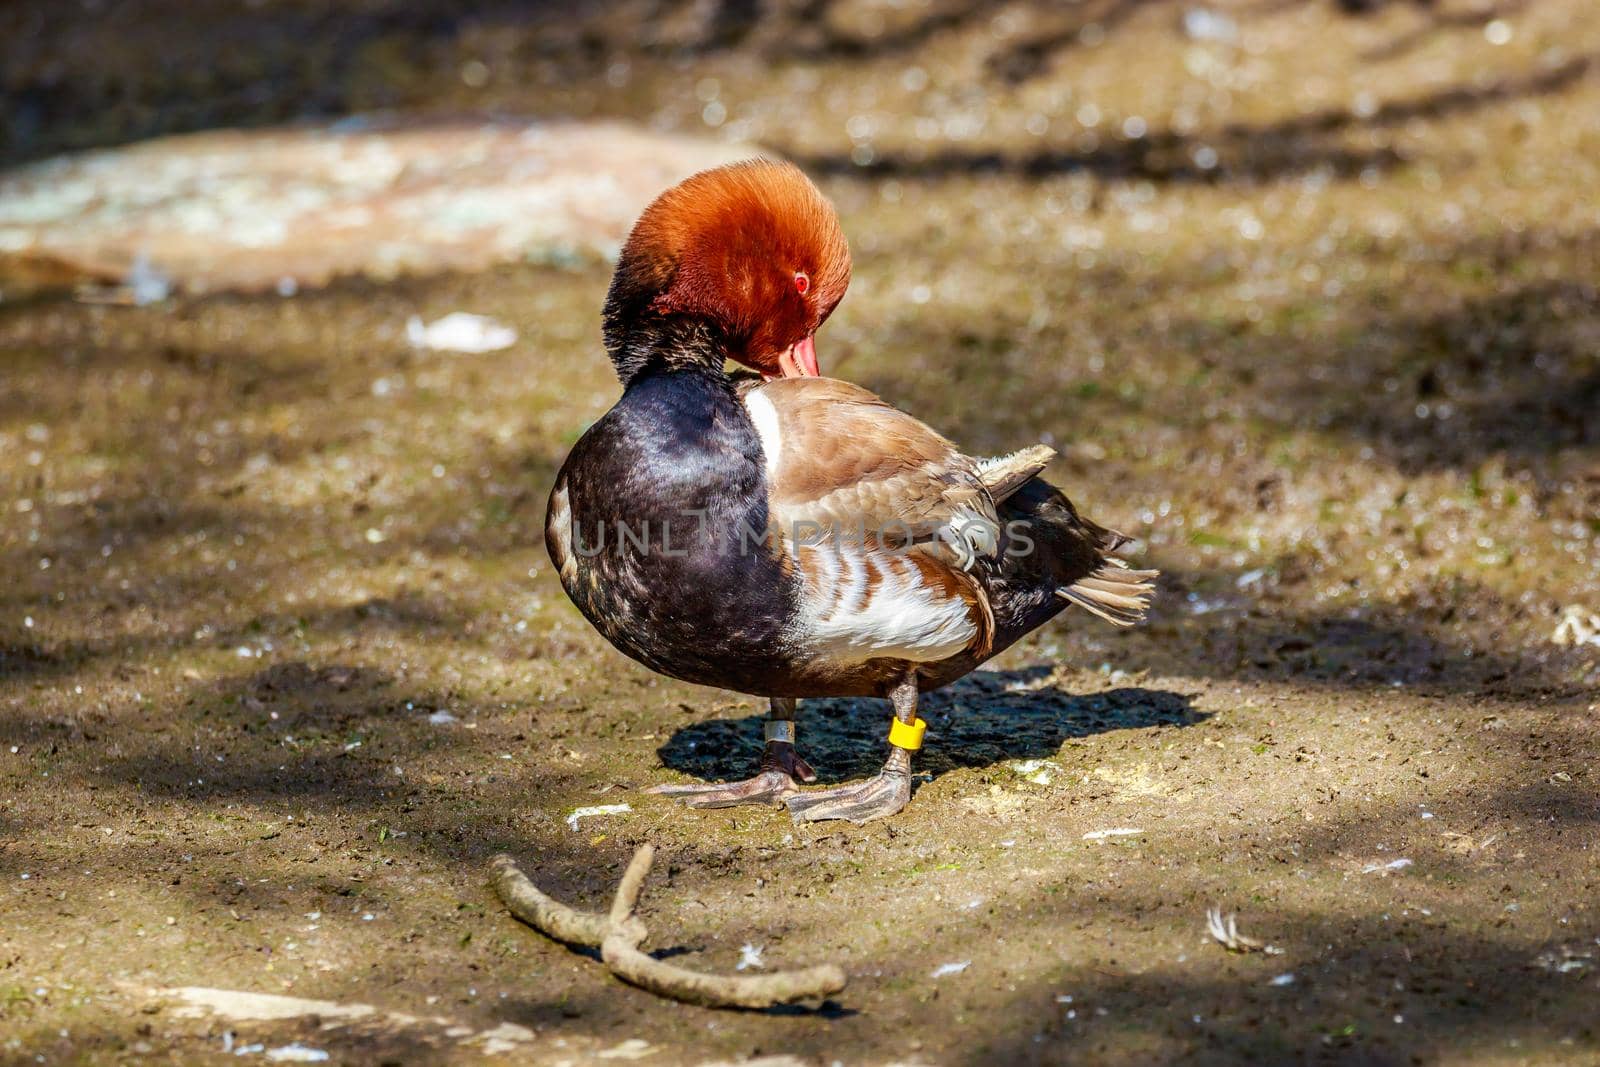 Male Red-Crested Pochard by gepeng